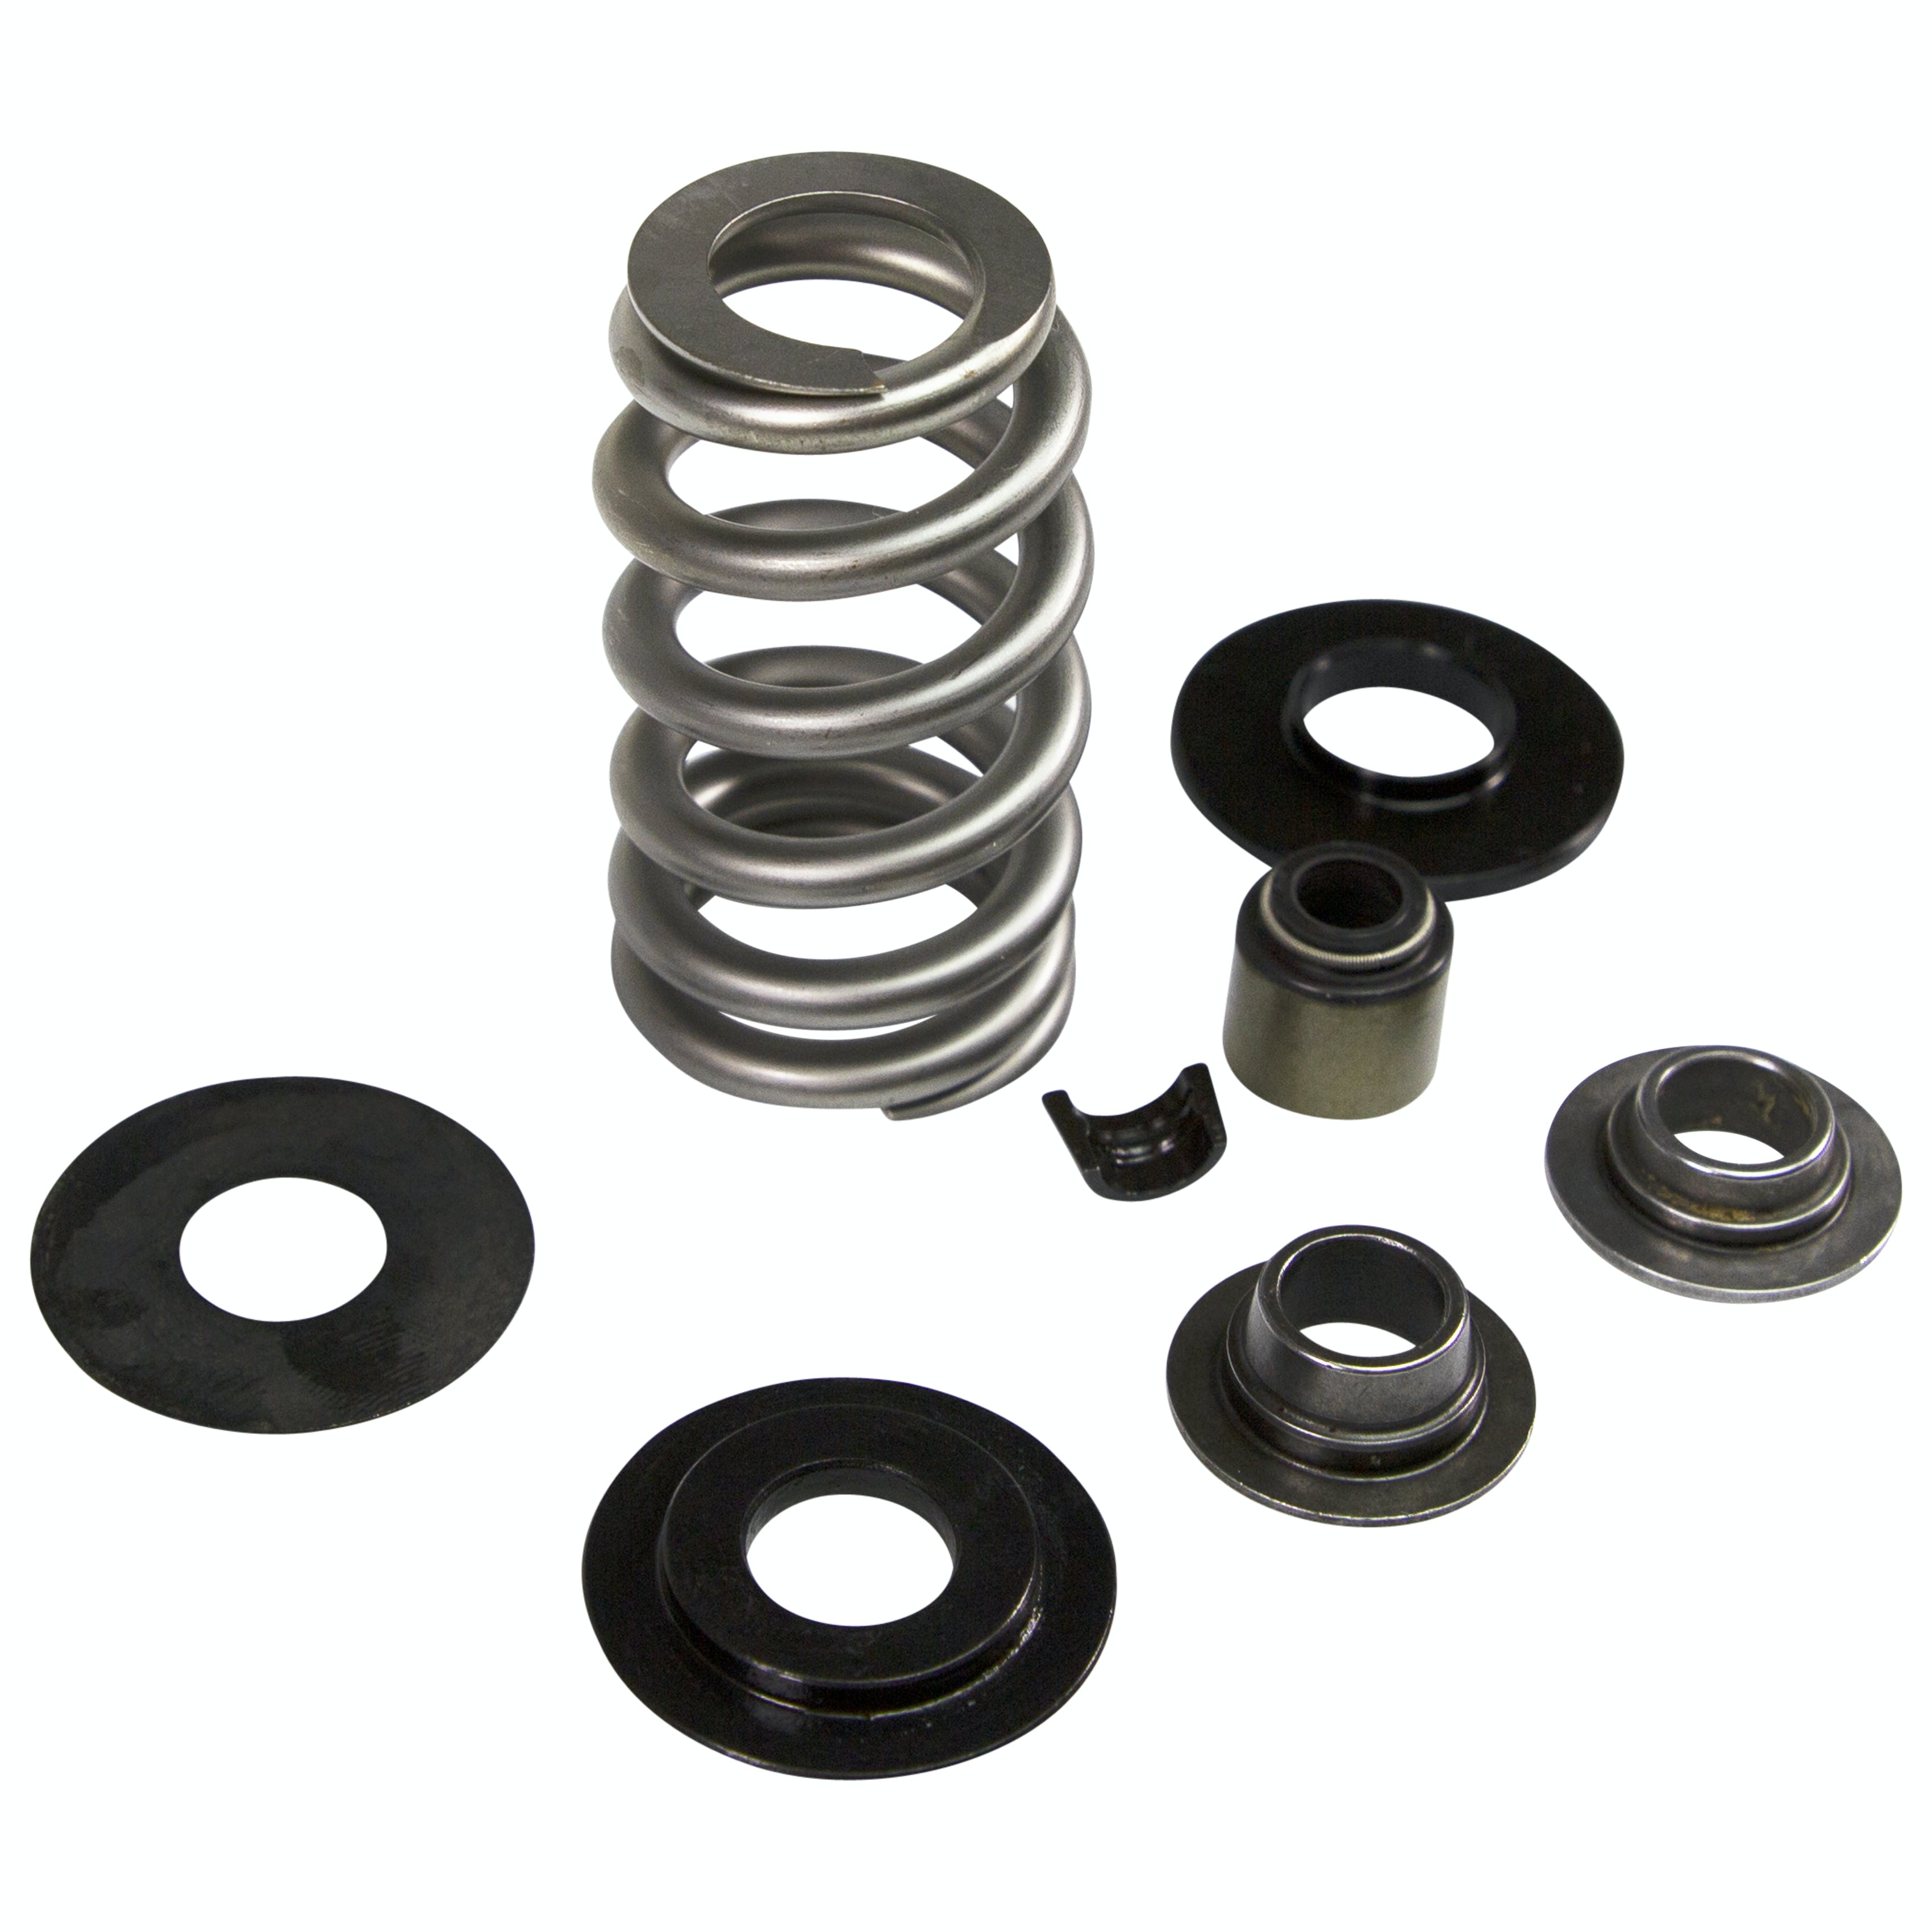 Competition Cams 26918TSD-KIT Beehive .600 inch Max Lift Valve Spring Kit for GM GEN V LT4 w/ Tool Steel Retainers